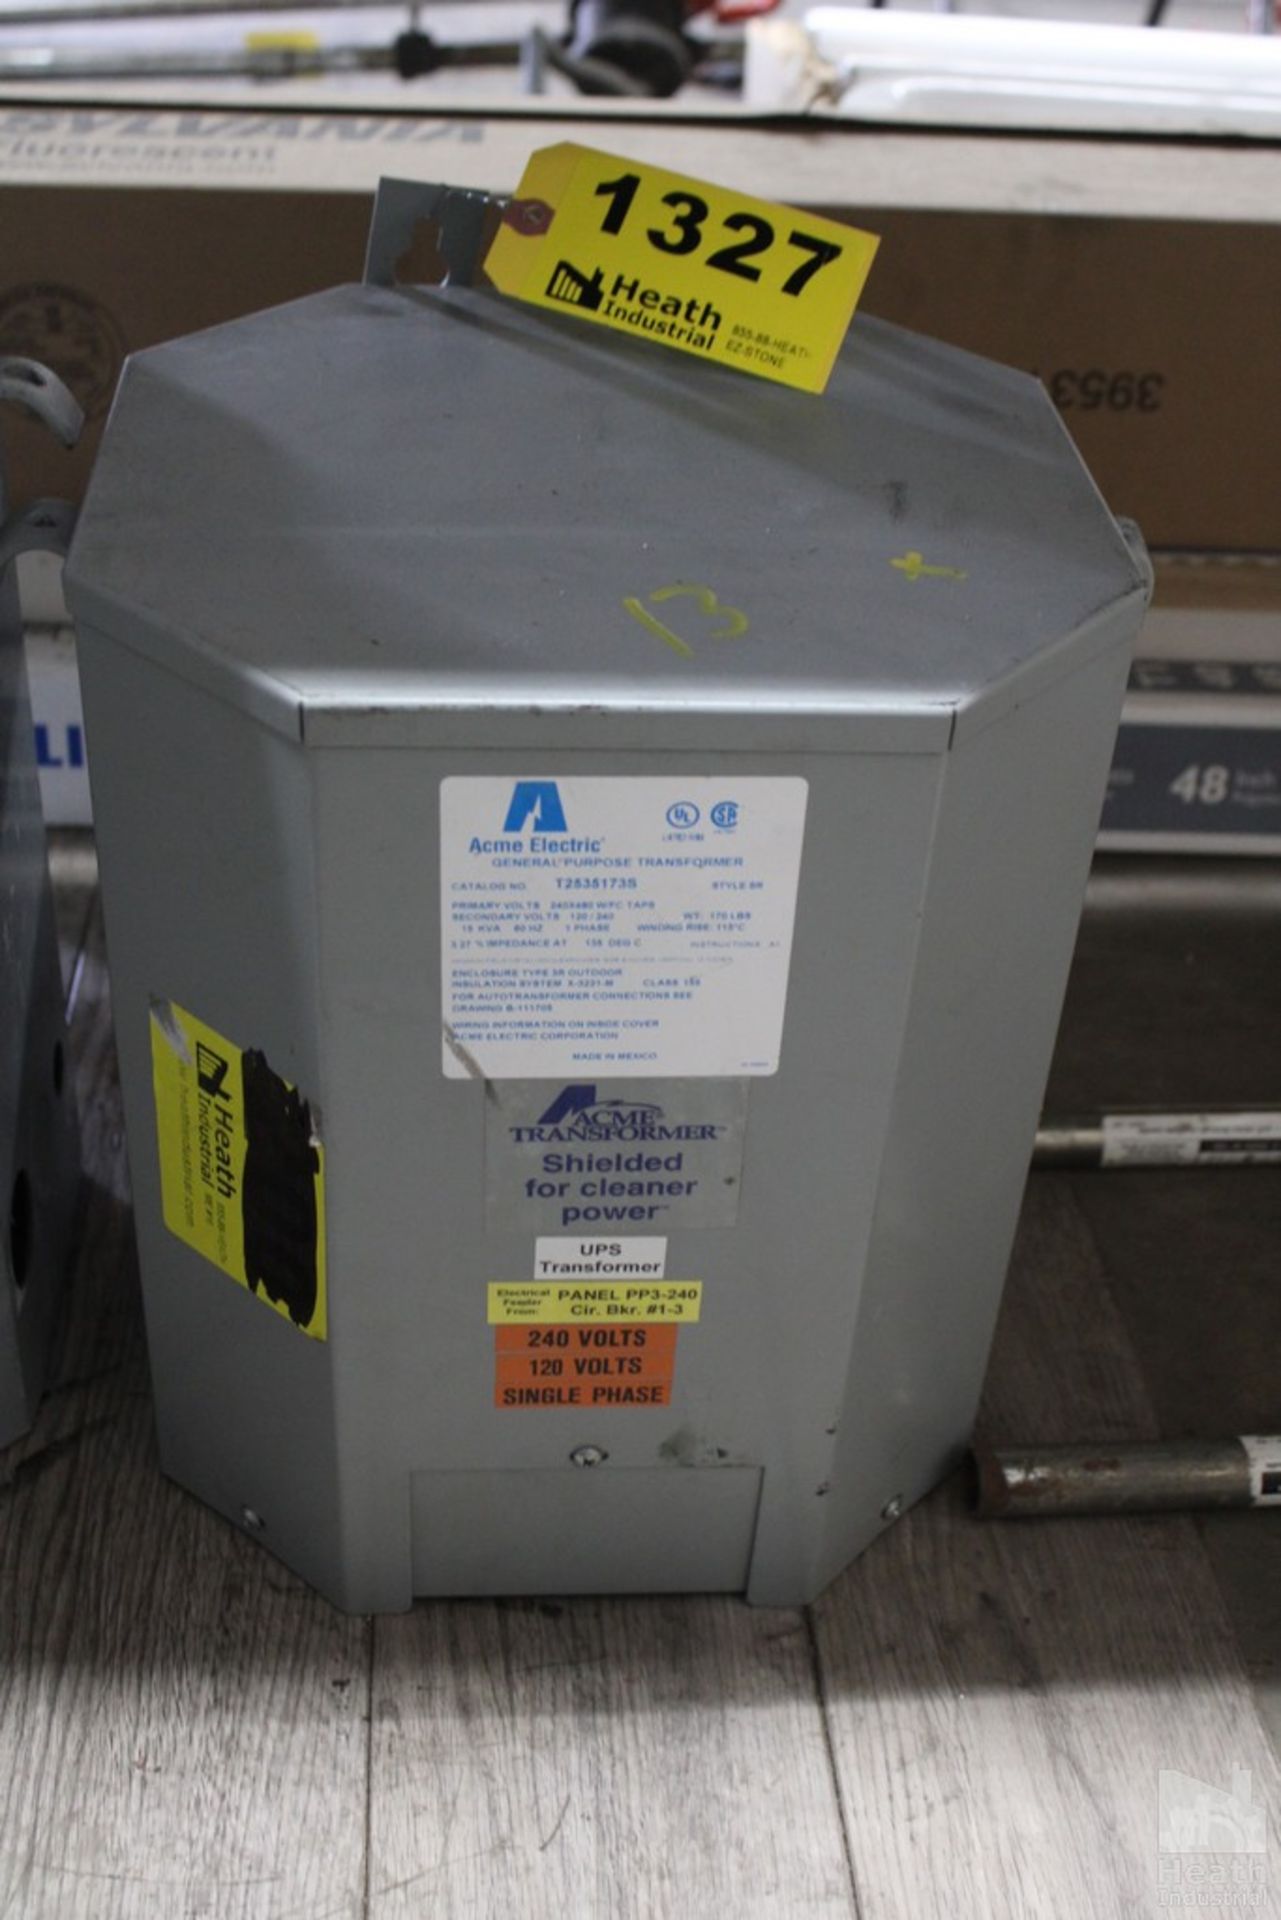 ACME GENERAL PURPOSE TRANSFORMER, CAT NO. T2535173S, STYLE-SR, PRIMARY VOLTS 240X48, SECONDARY VOLTS